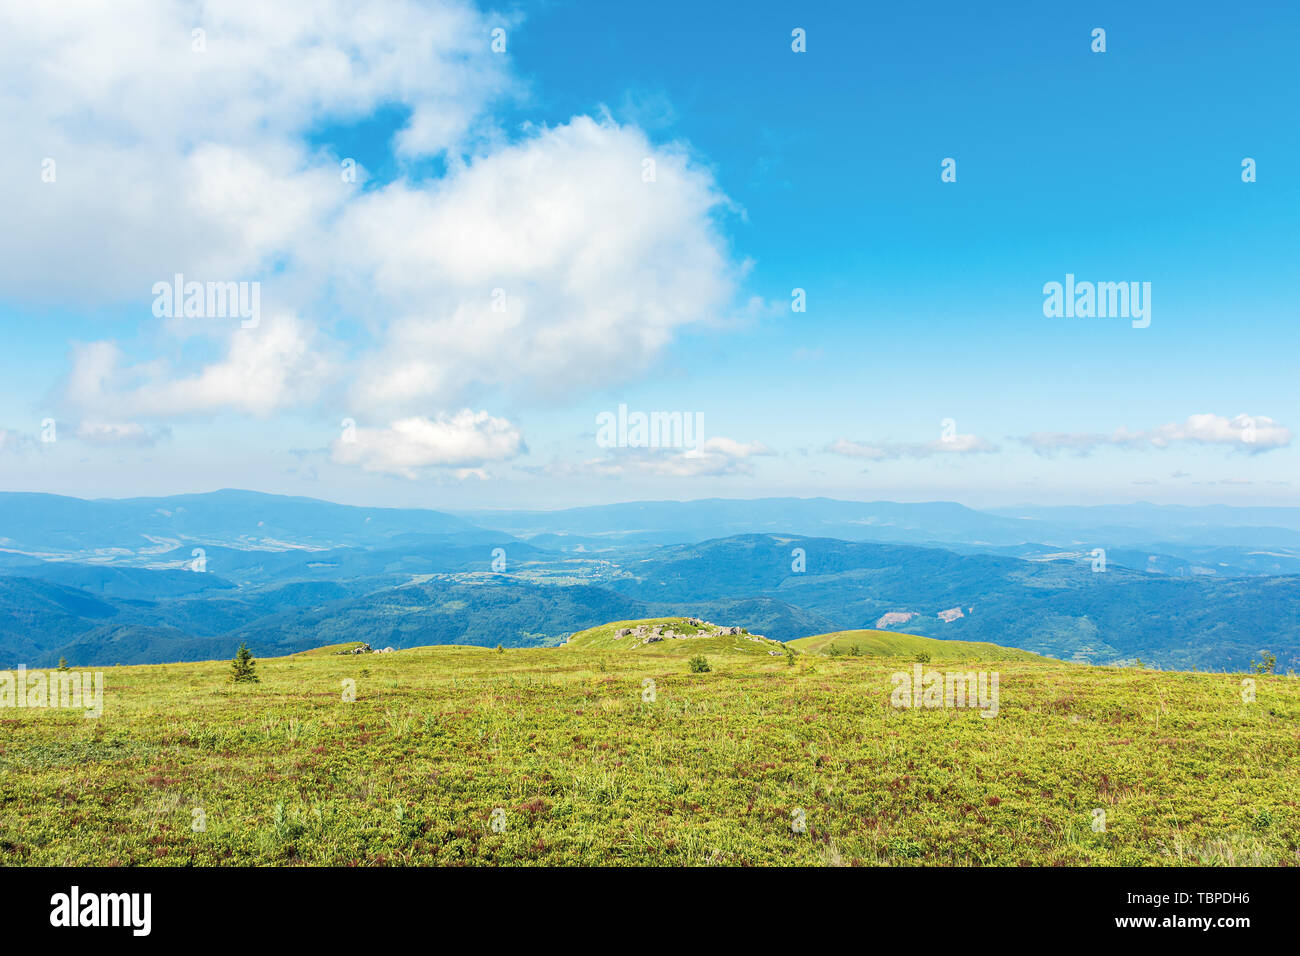 beautiful minimal landscape. fluffy cloud above flat grassy meadow. rocks on the distant hump. mountain ridge in the distance. wonderful summer scener Stock Photo